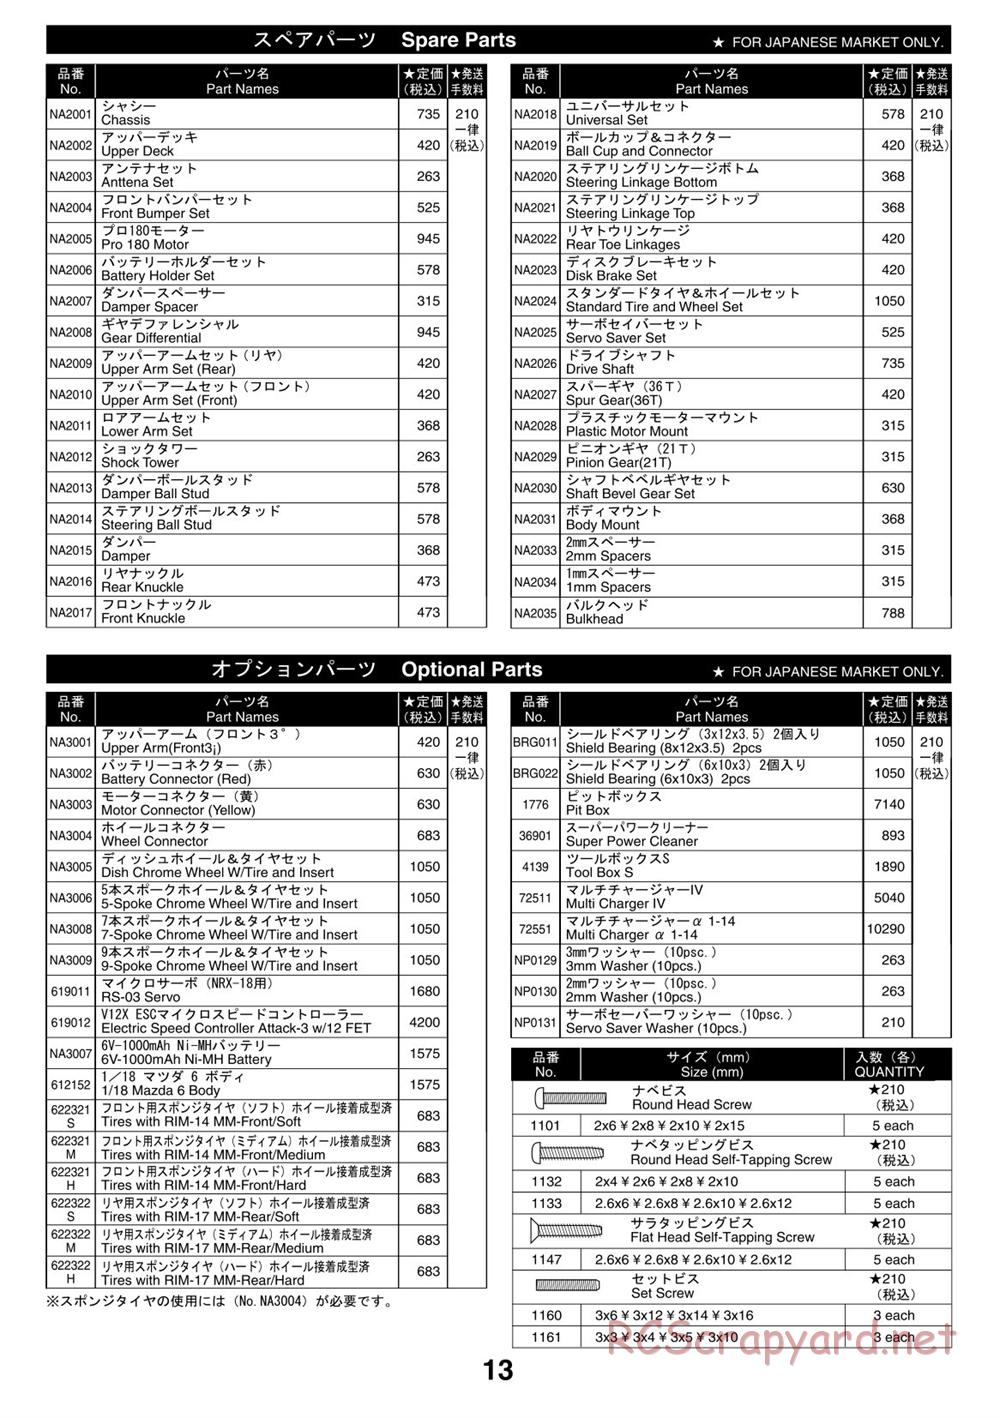 Kyosho - NRX-18 - Parts List - Page 1